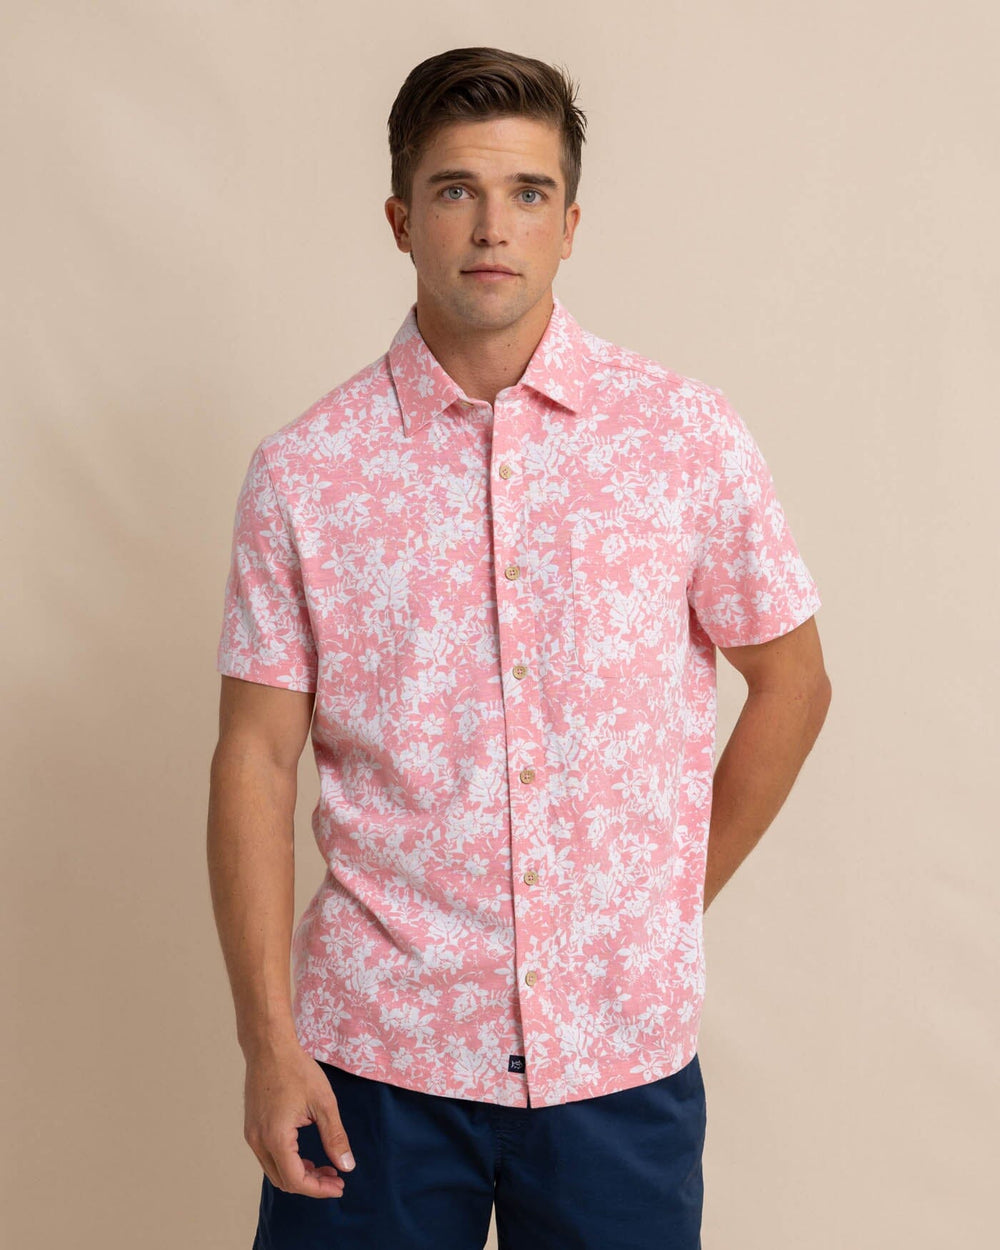 The front view of the Southern Tide Beachcast Island Blooms Knit Short Sleeve Sport Shirt by Southern Tide - Geranium Pink